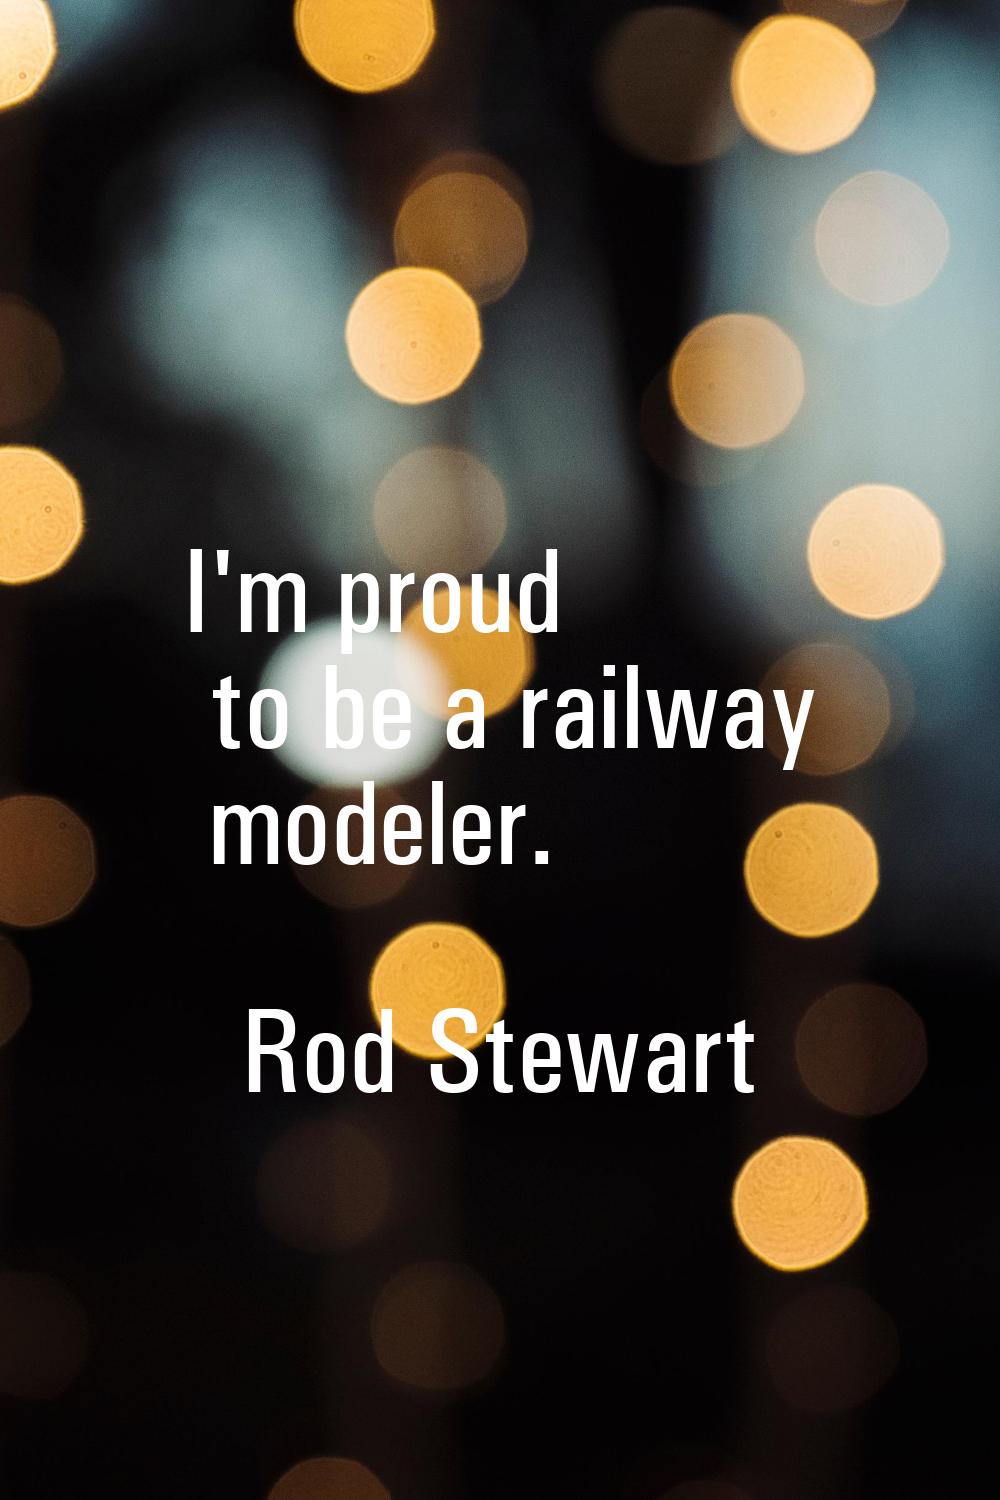 I'm proud to be a railway modeler.